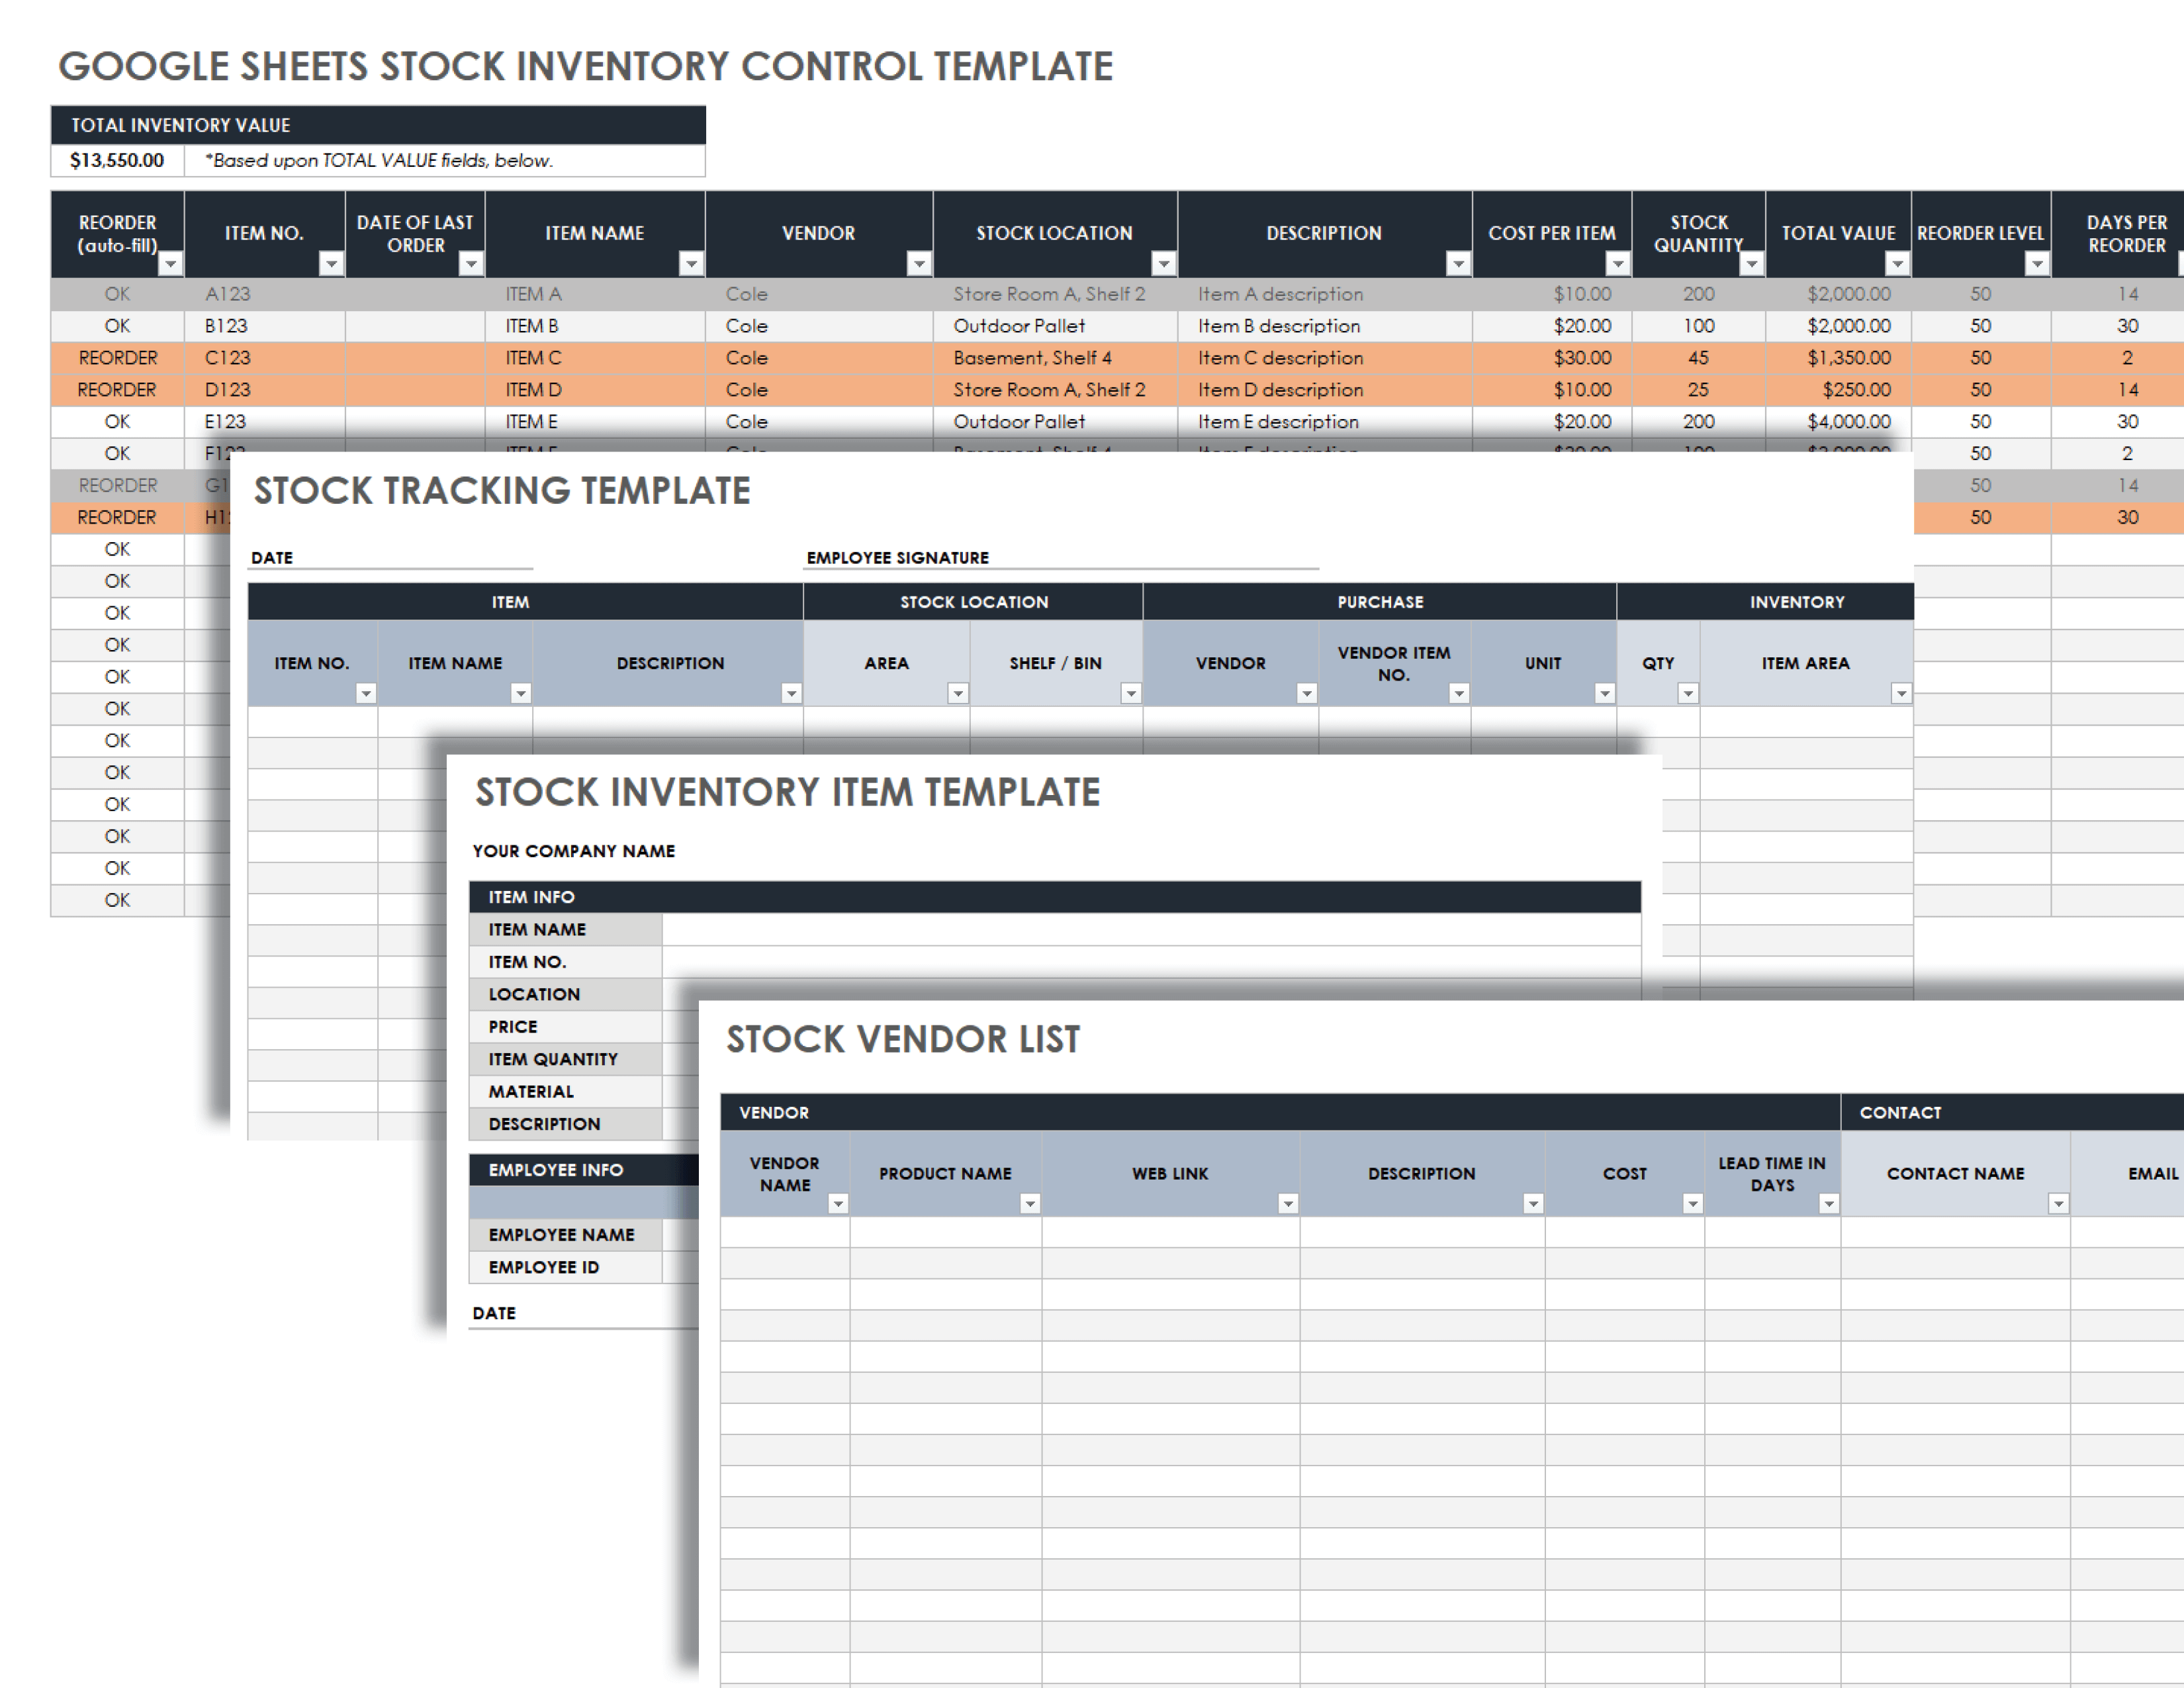 Google Sheets Stock Inventory Control Template